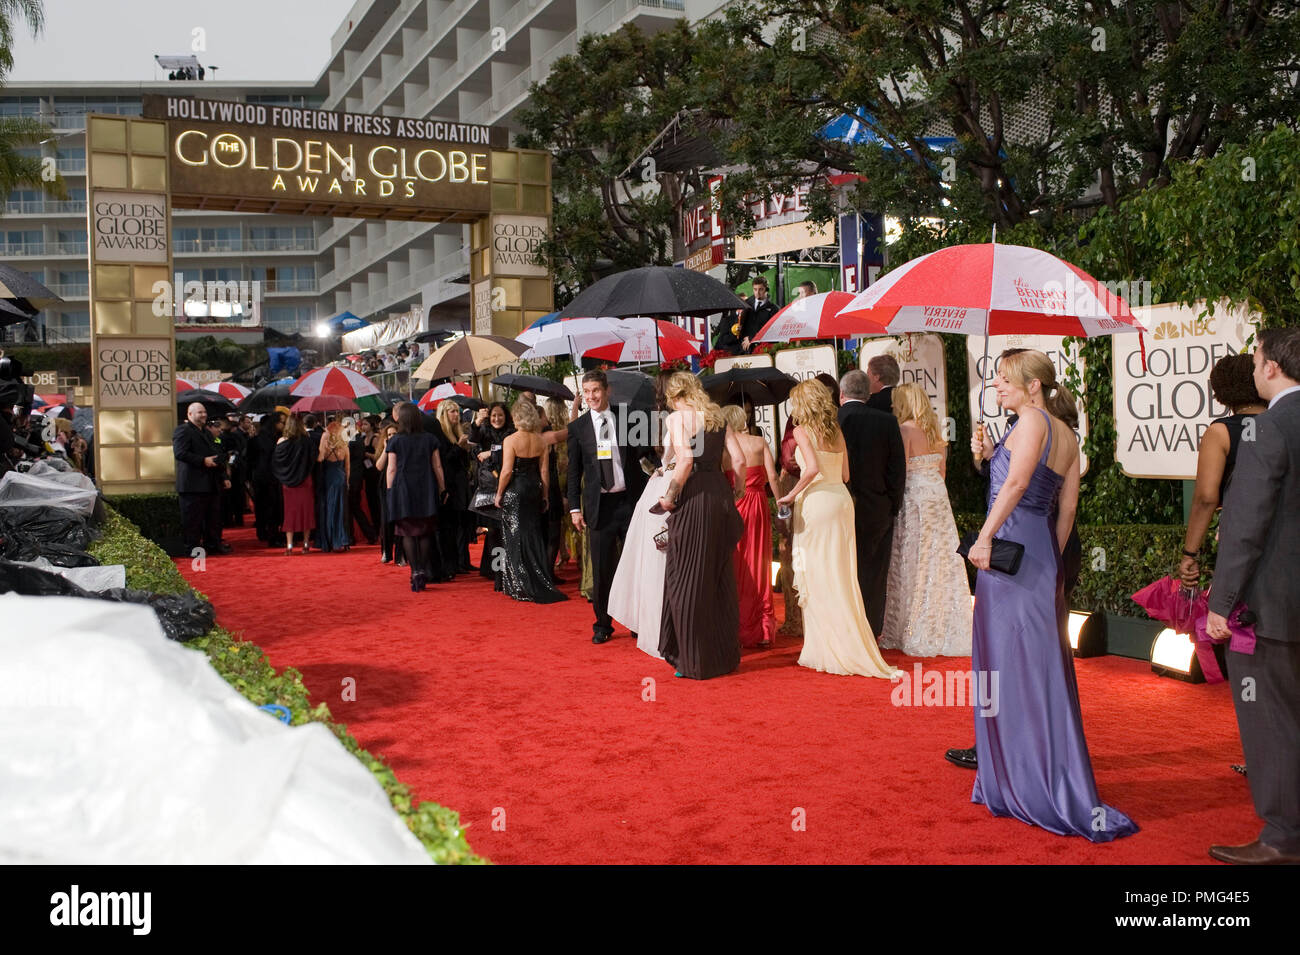 The 67th Annual Golden Globe Awards at the Beverly Hilton in Beverly Hills, CA Sunday, January 17, 2010. Stock Photo